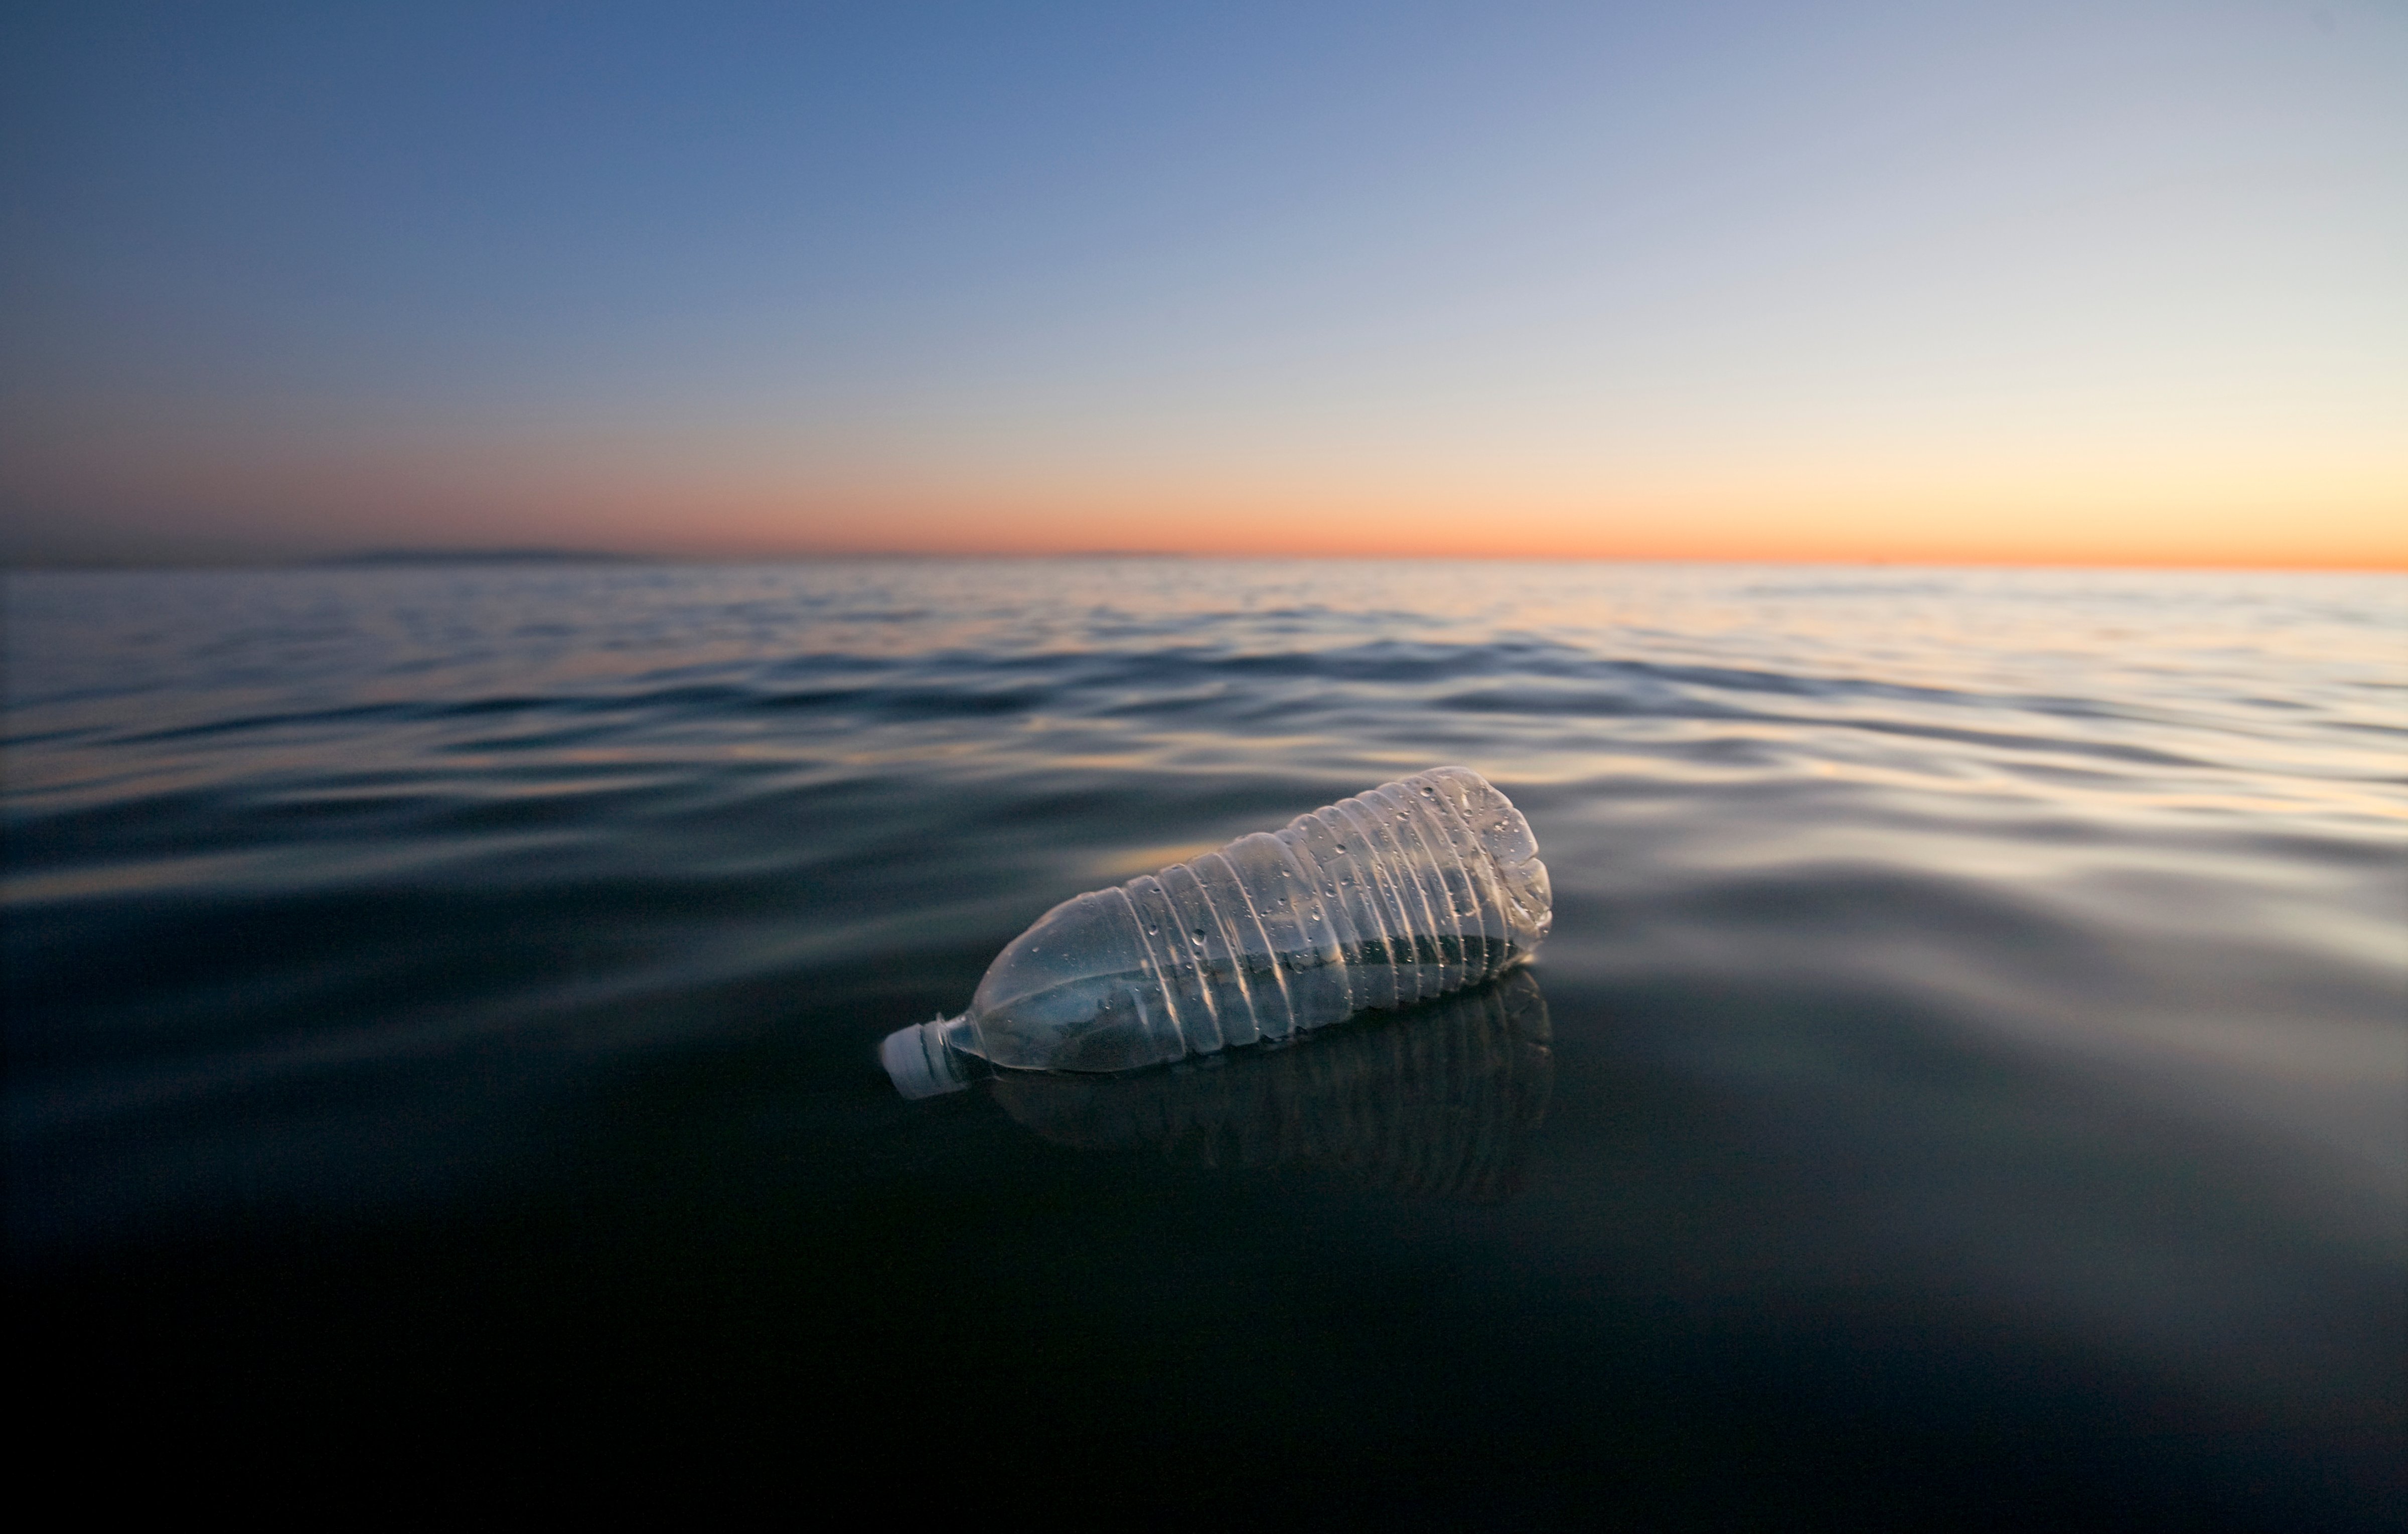 Plastic Water Bottle Floating in Pacific Ocean, Santa Monica, California, USA (UniversalImagesGroup/Getty Images)